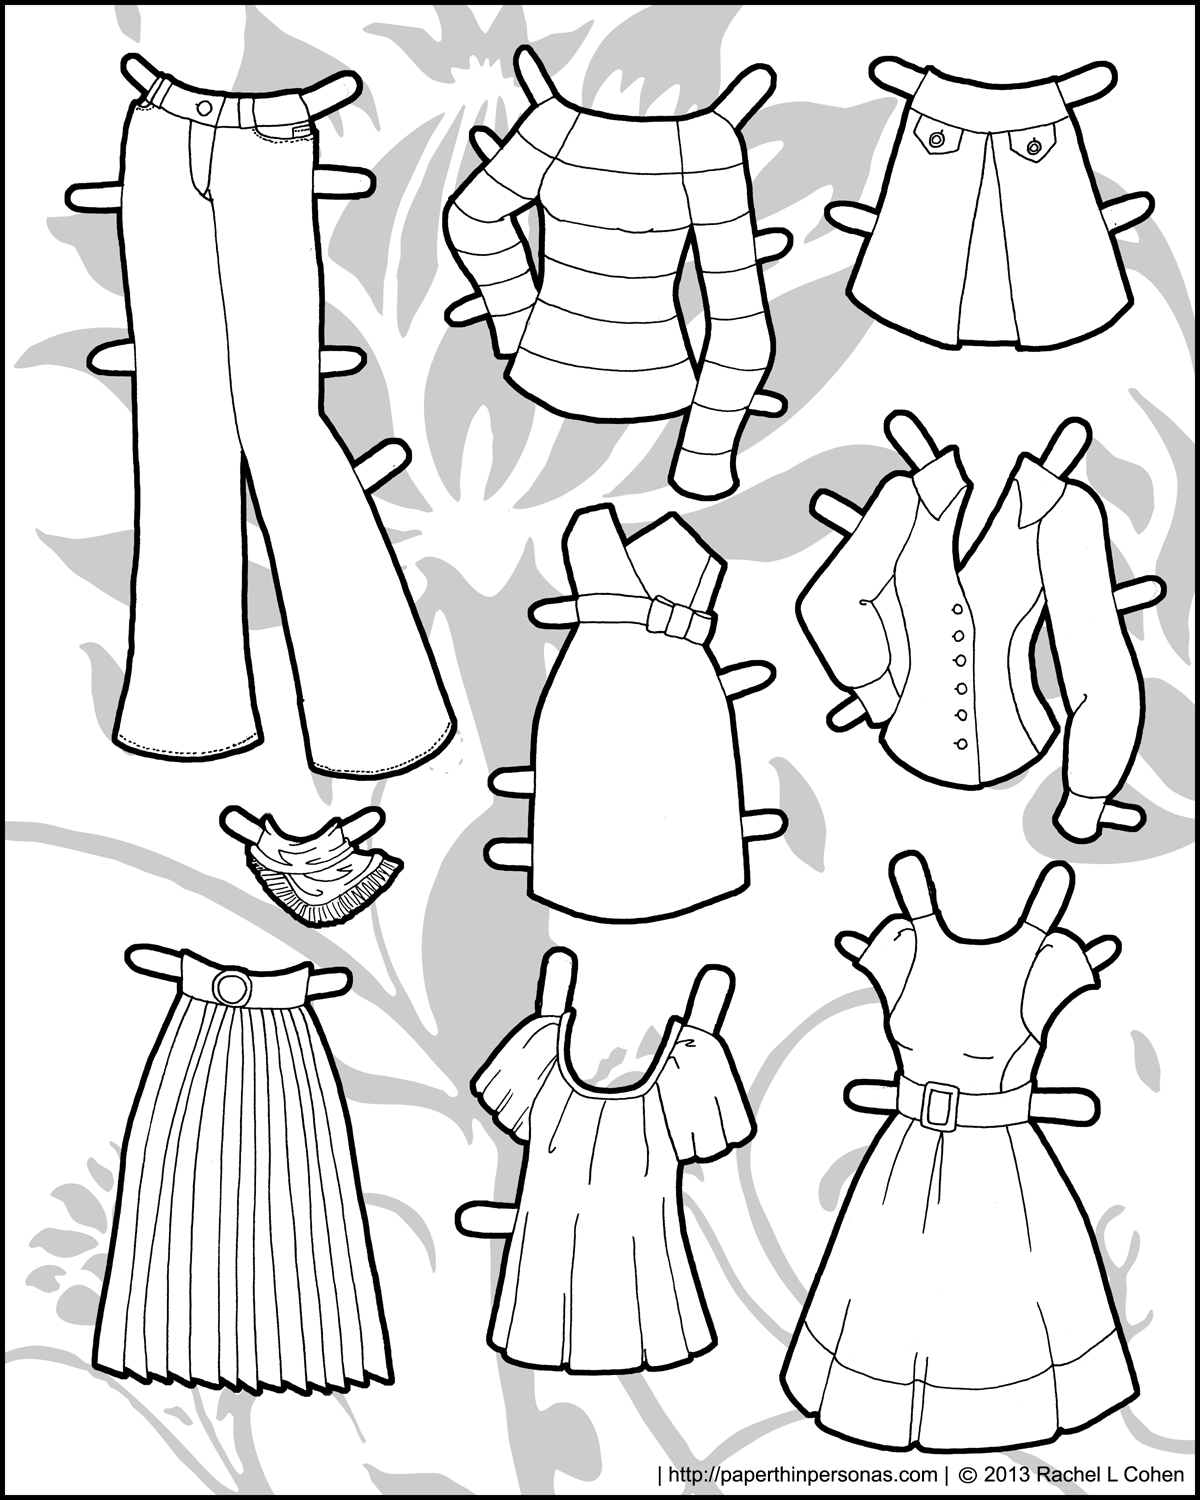 And yet more clothing for the Ms Mannequin Printable Paper Dolls